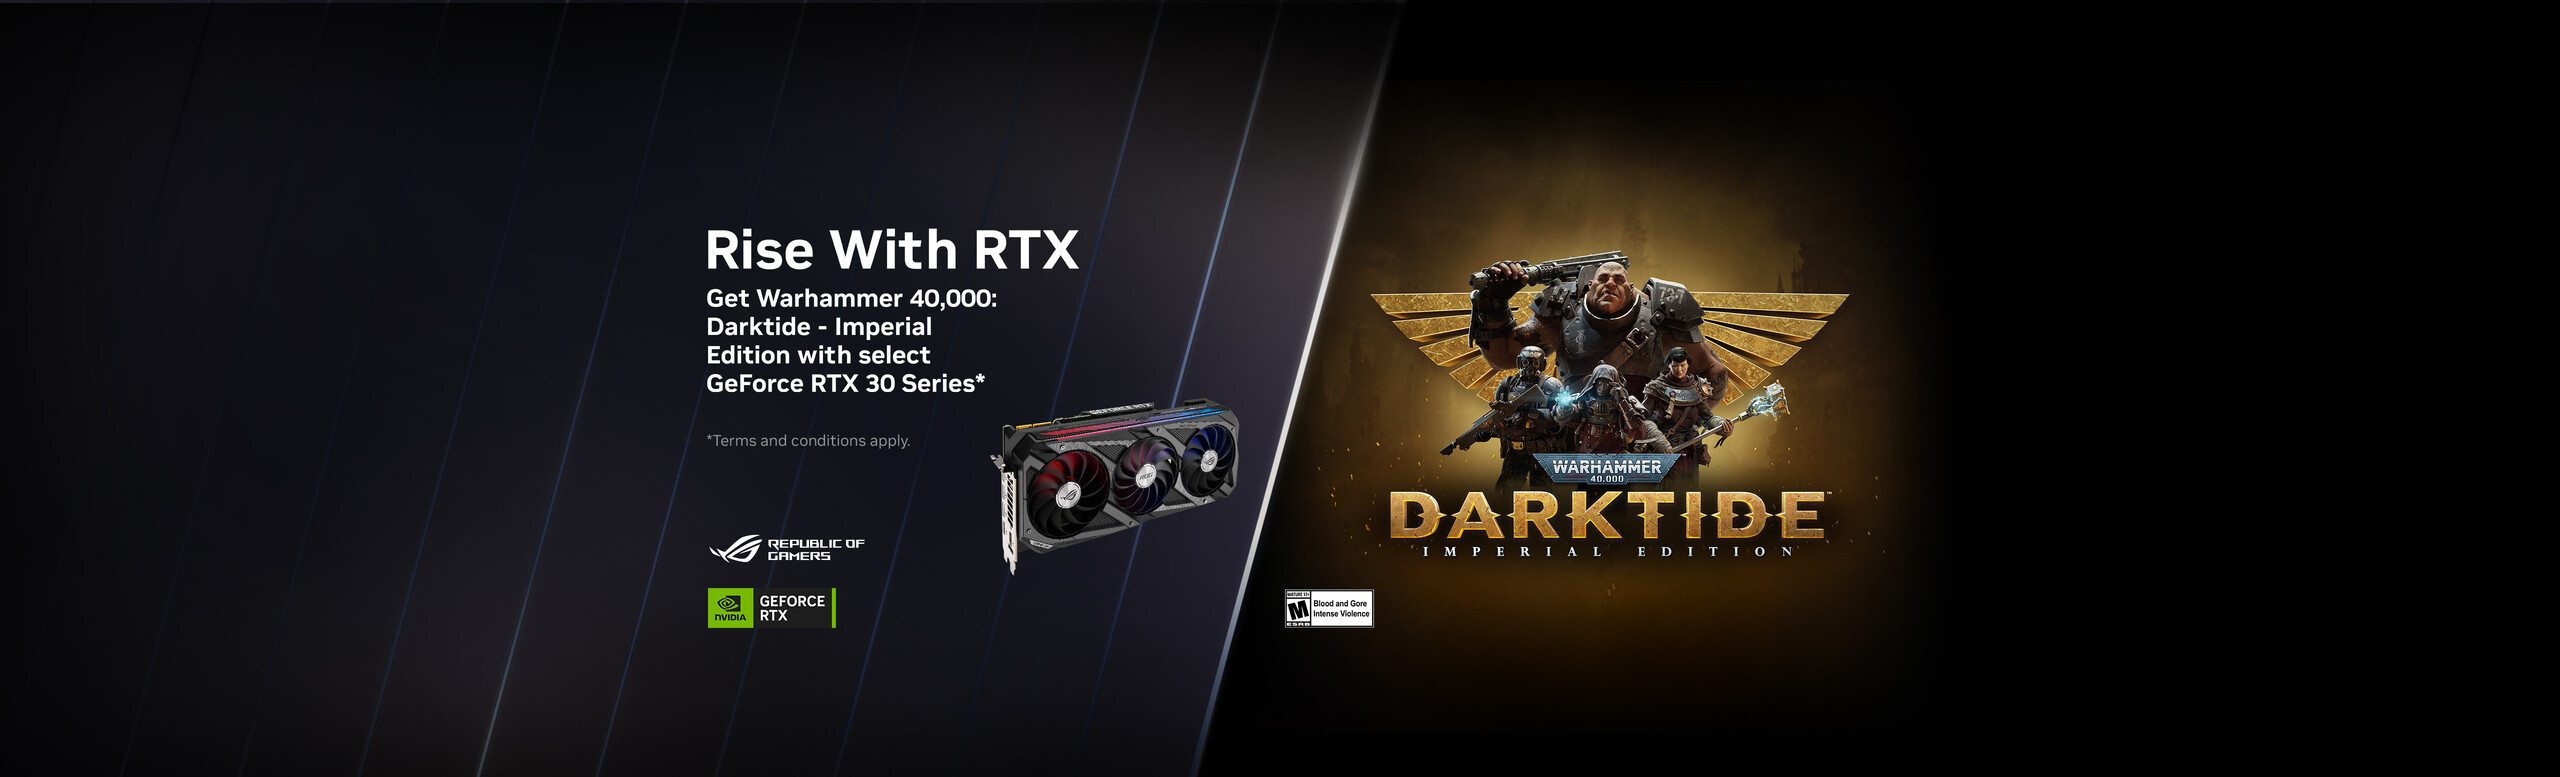 Rise with RTX bundle banner and ROG Strix RTX 3080 graphics card